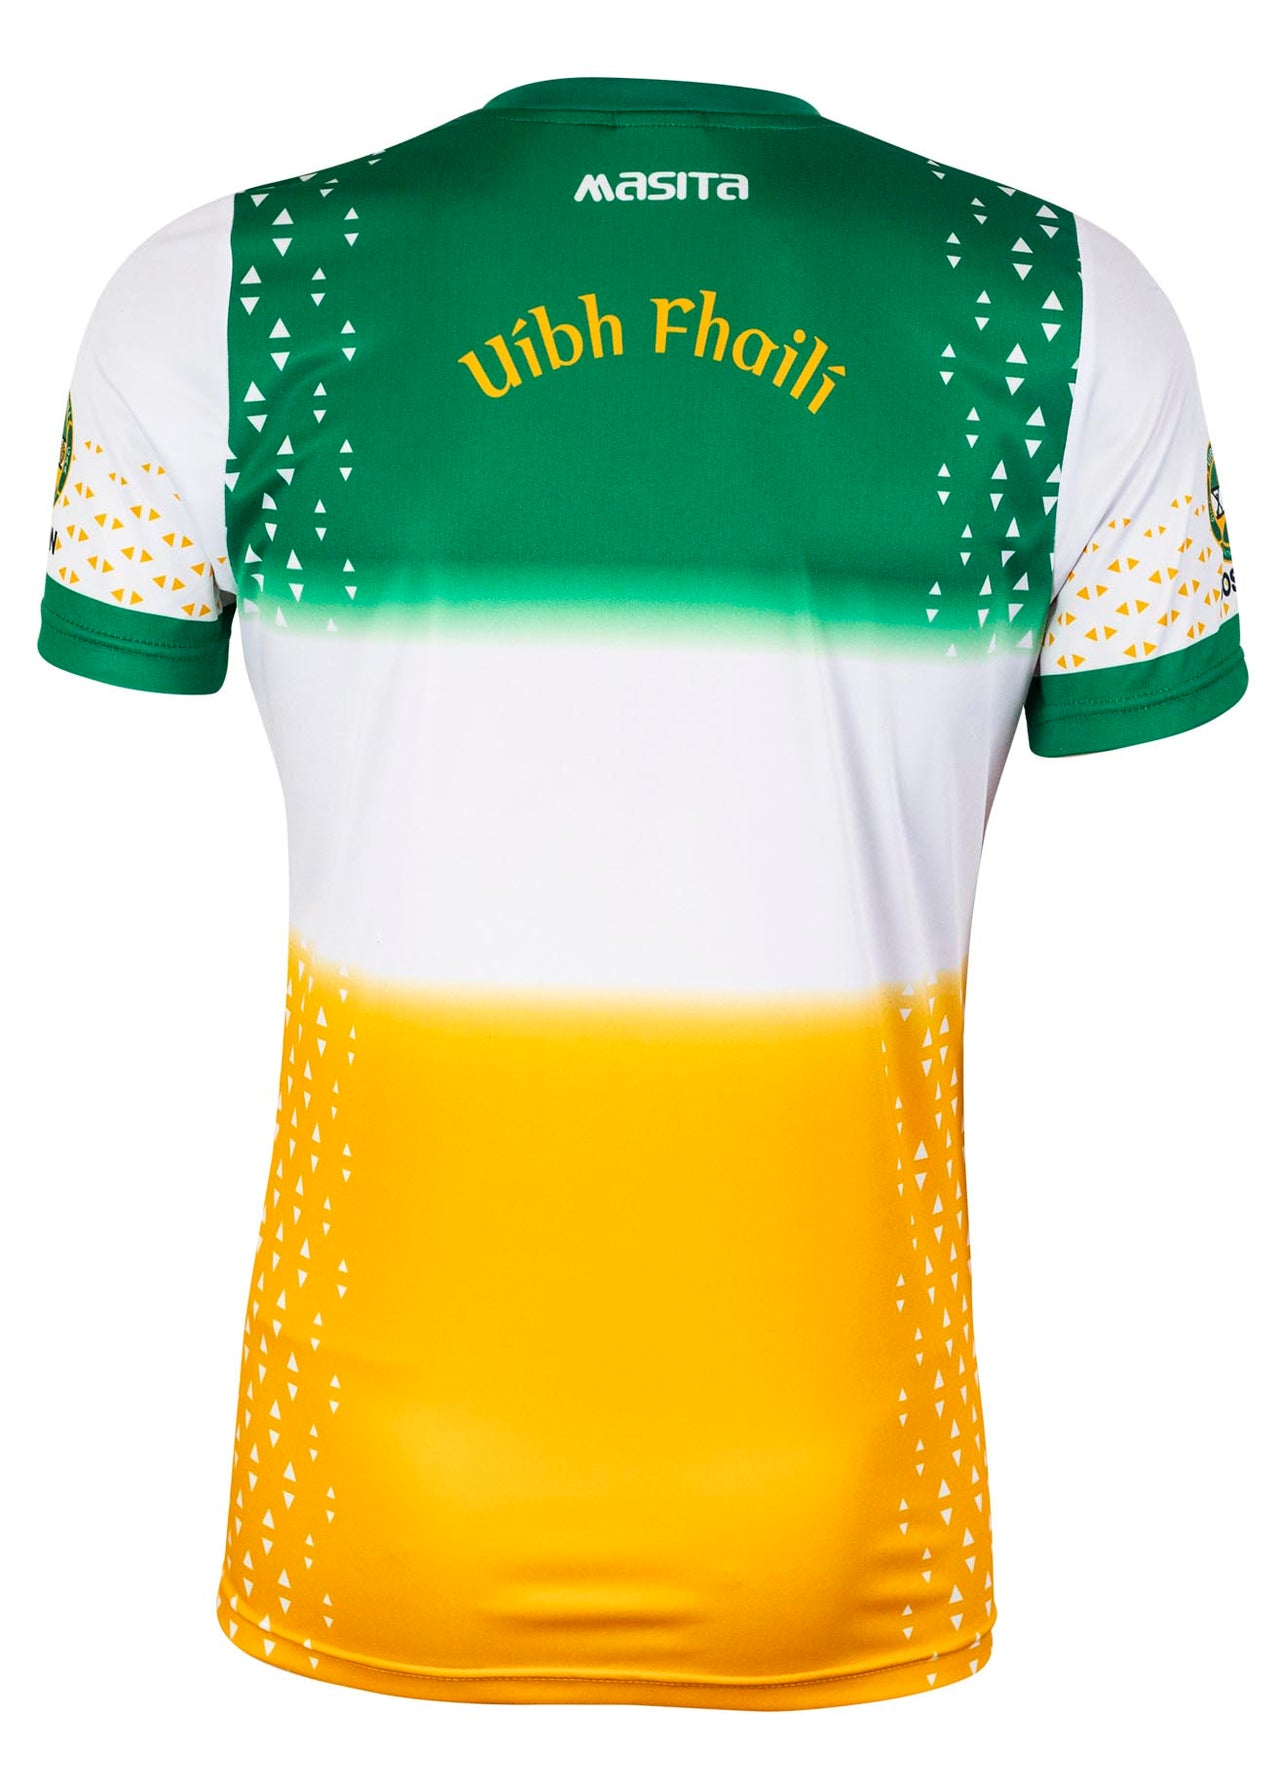 Offaly Boston Alternative Jersey Player Fit Adult